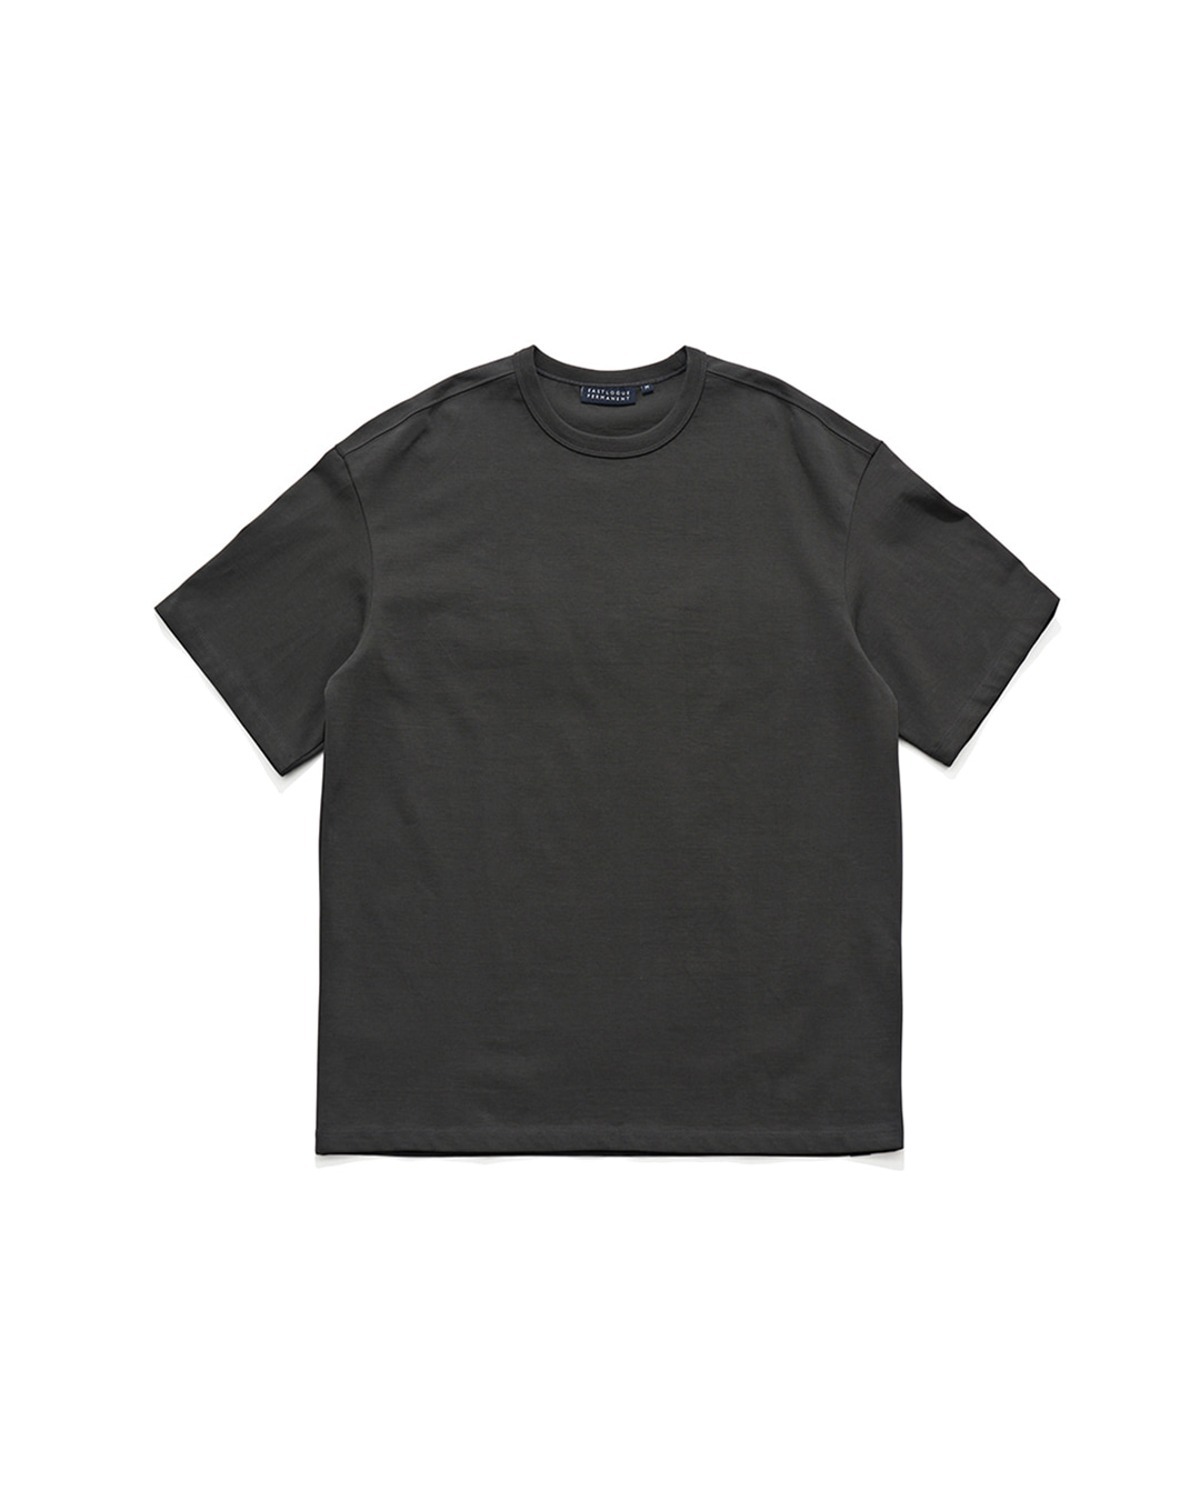 LOOSE FIT T-SHIRT / CHARCOAL